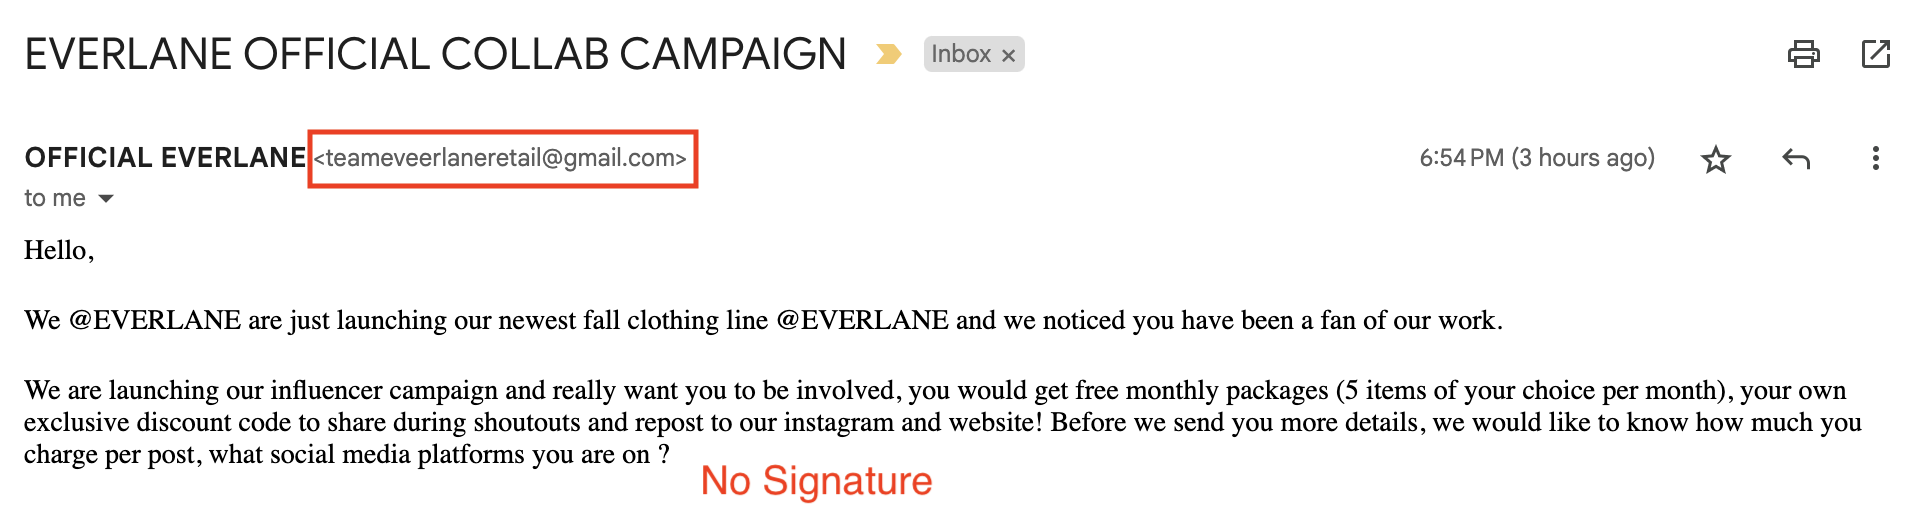 Fake Everlane Collaboration Email example